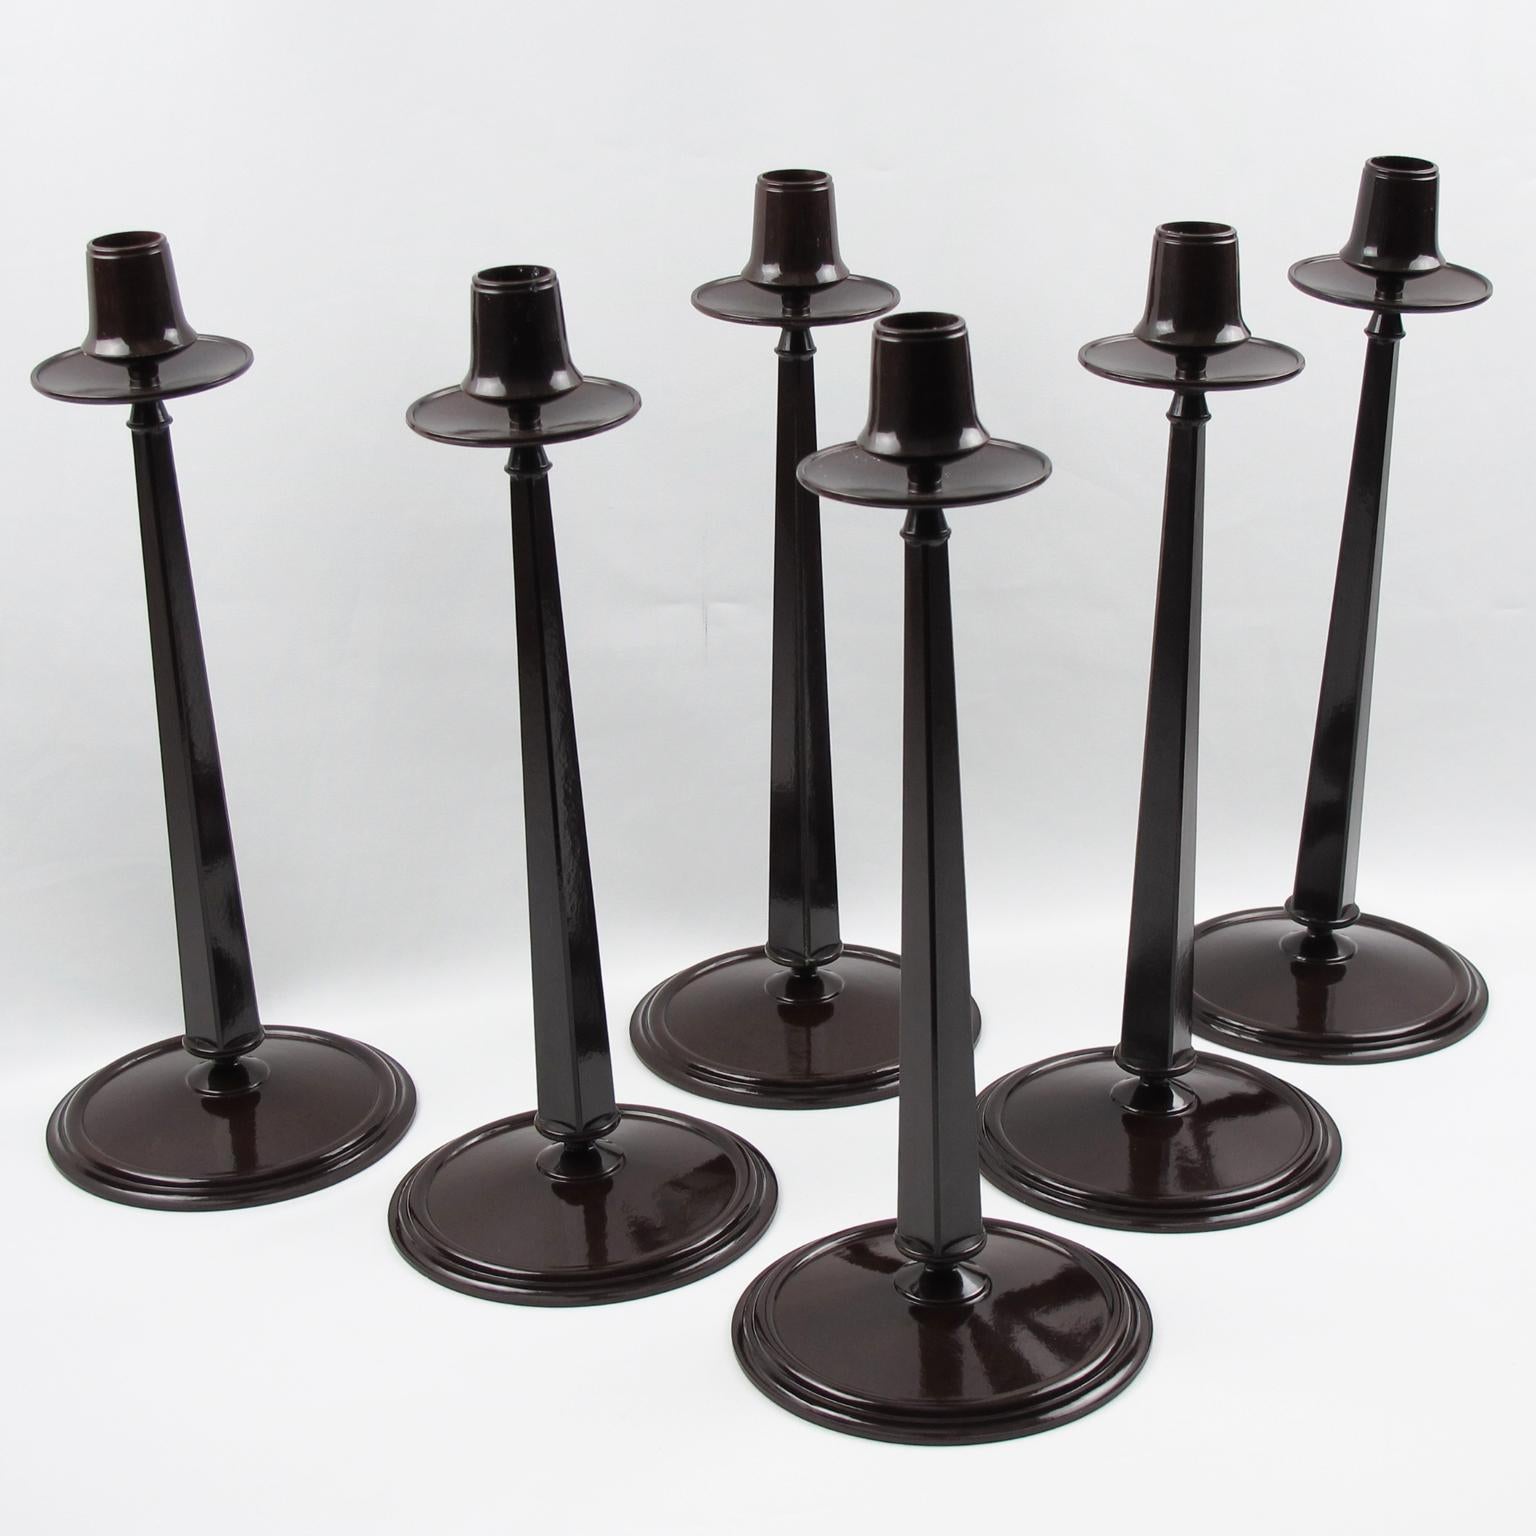 This is the most iconic Bakelite piece ever. Set of six elegant Jugendstil tall tapered Bakelite candlesticks. These pieces were manufactured by Linsden Ware, England, in the late 1920s on an original design of Charles Rennie Mackintosh. The